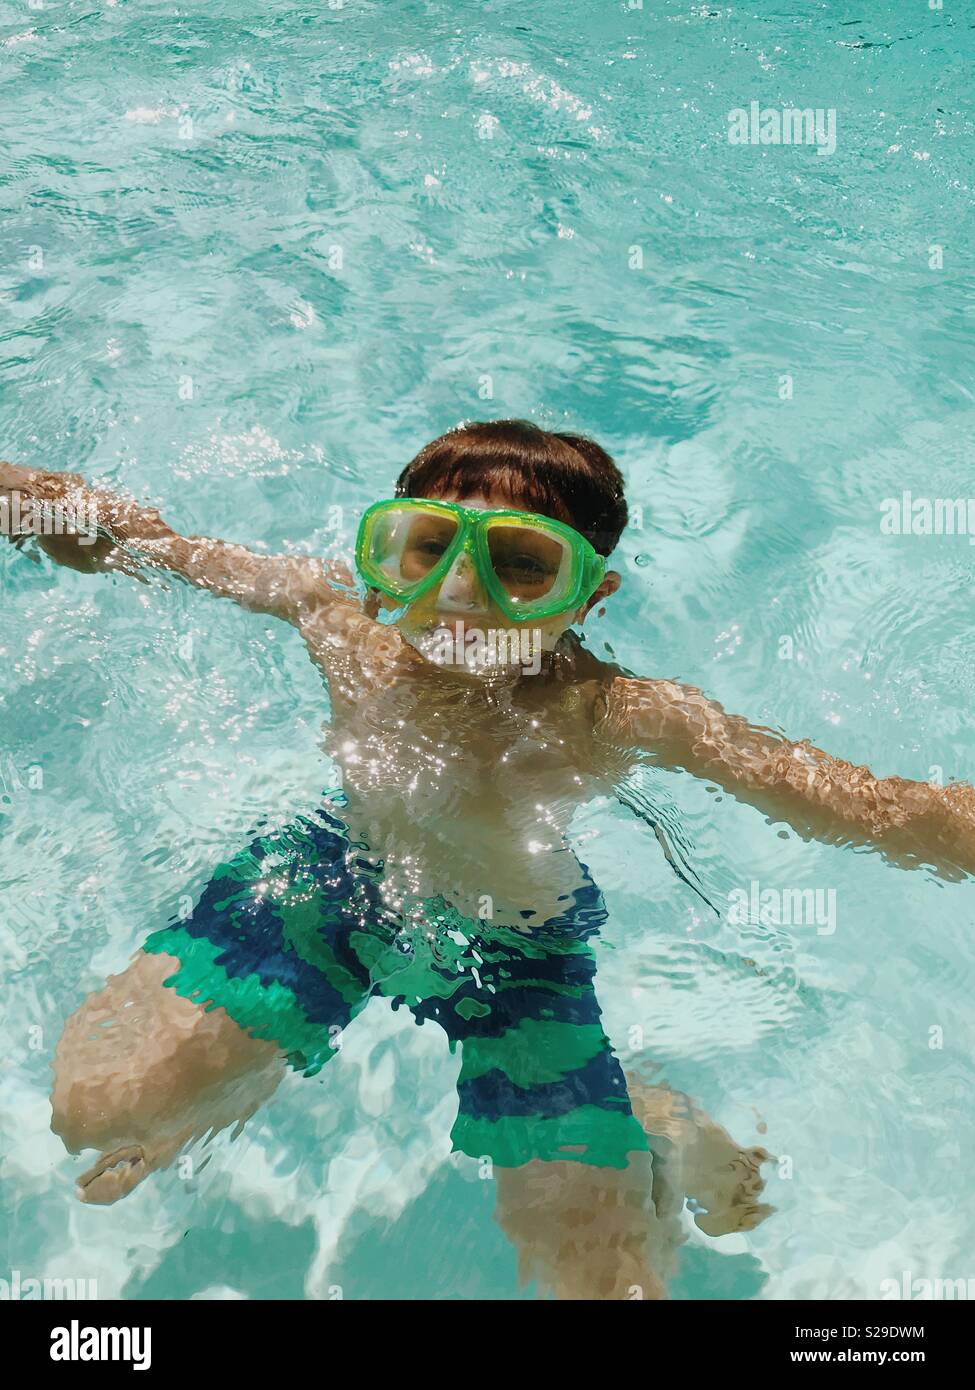 A young boy in a snorkeling mask underwater in an outdoor swimming pool. Stock Photo